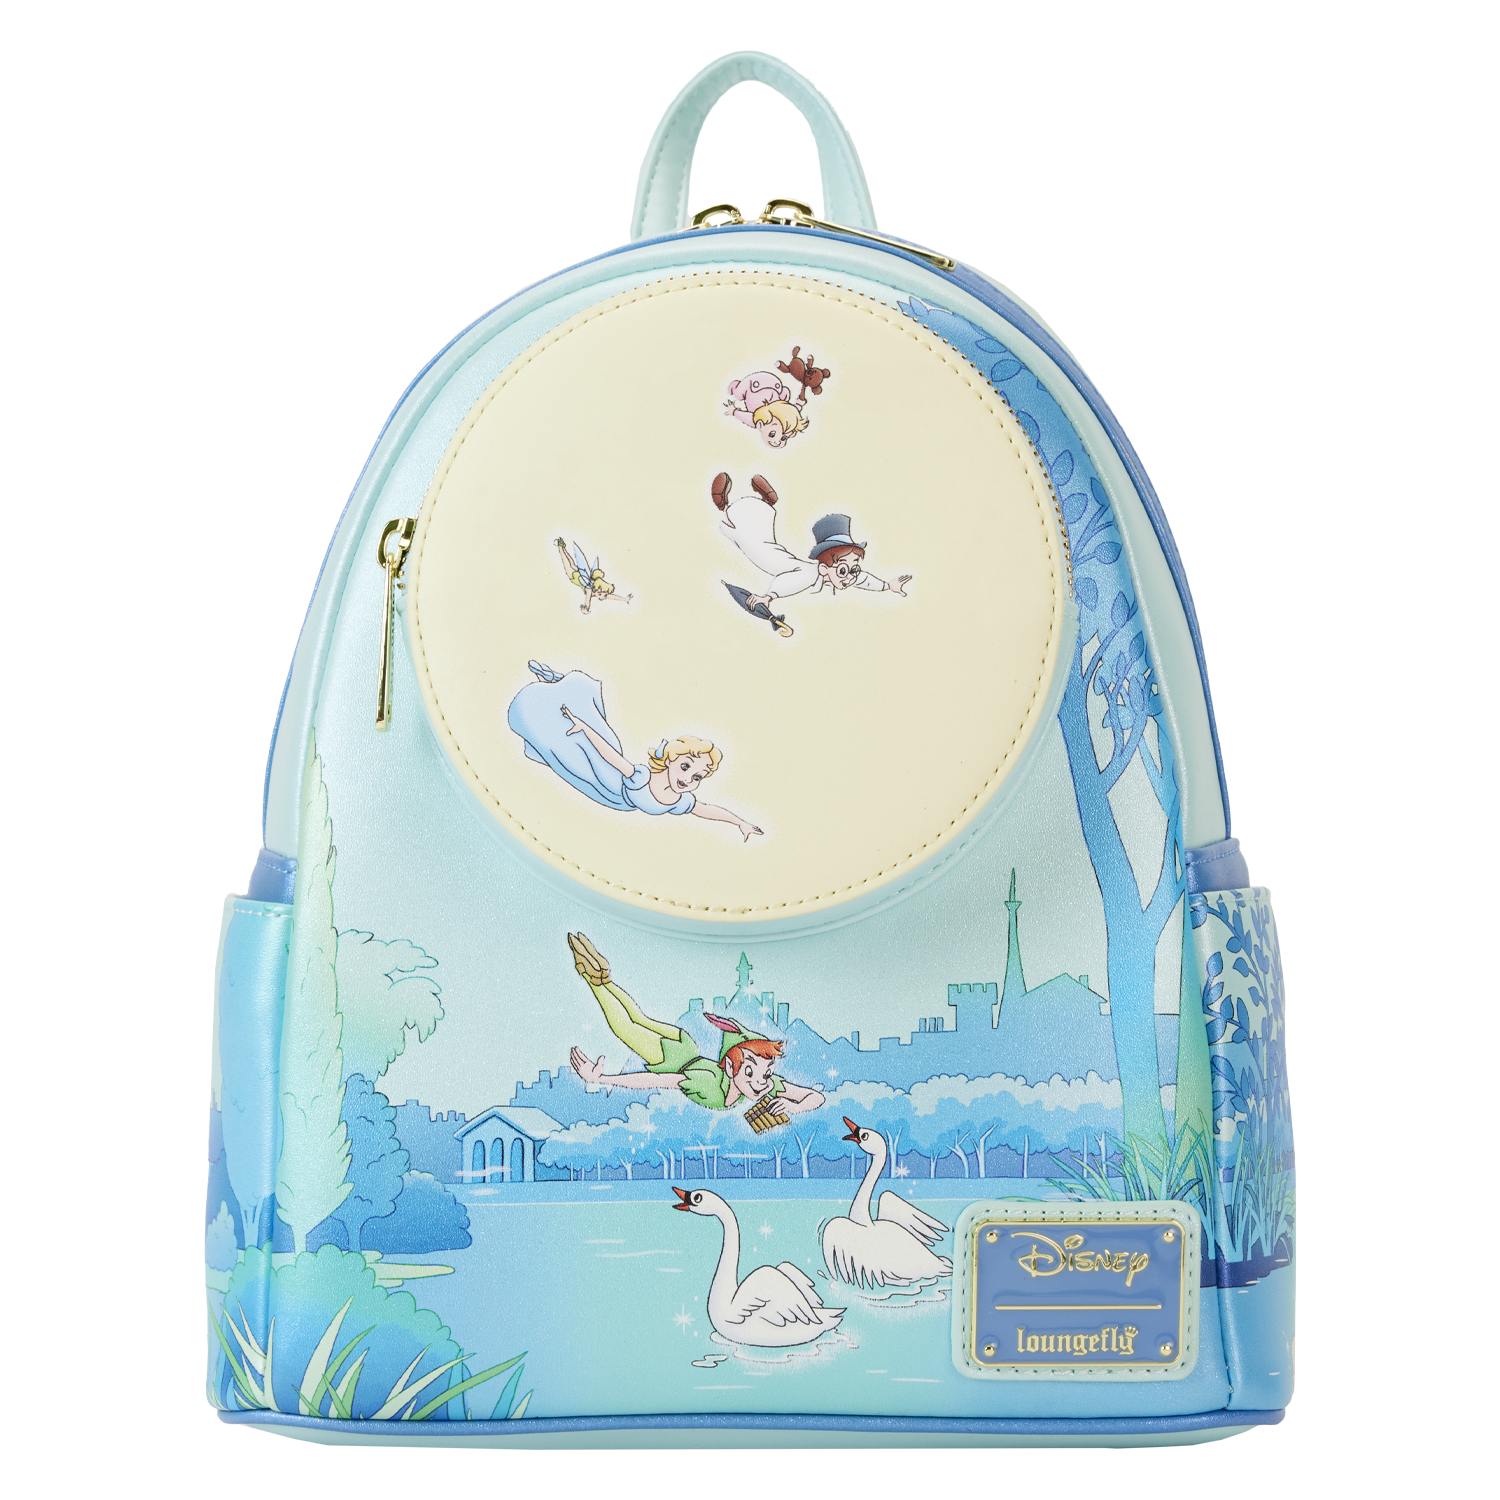 Buy Peter Pan You Can Fly Glow Mini Backpack at Loungefly.